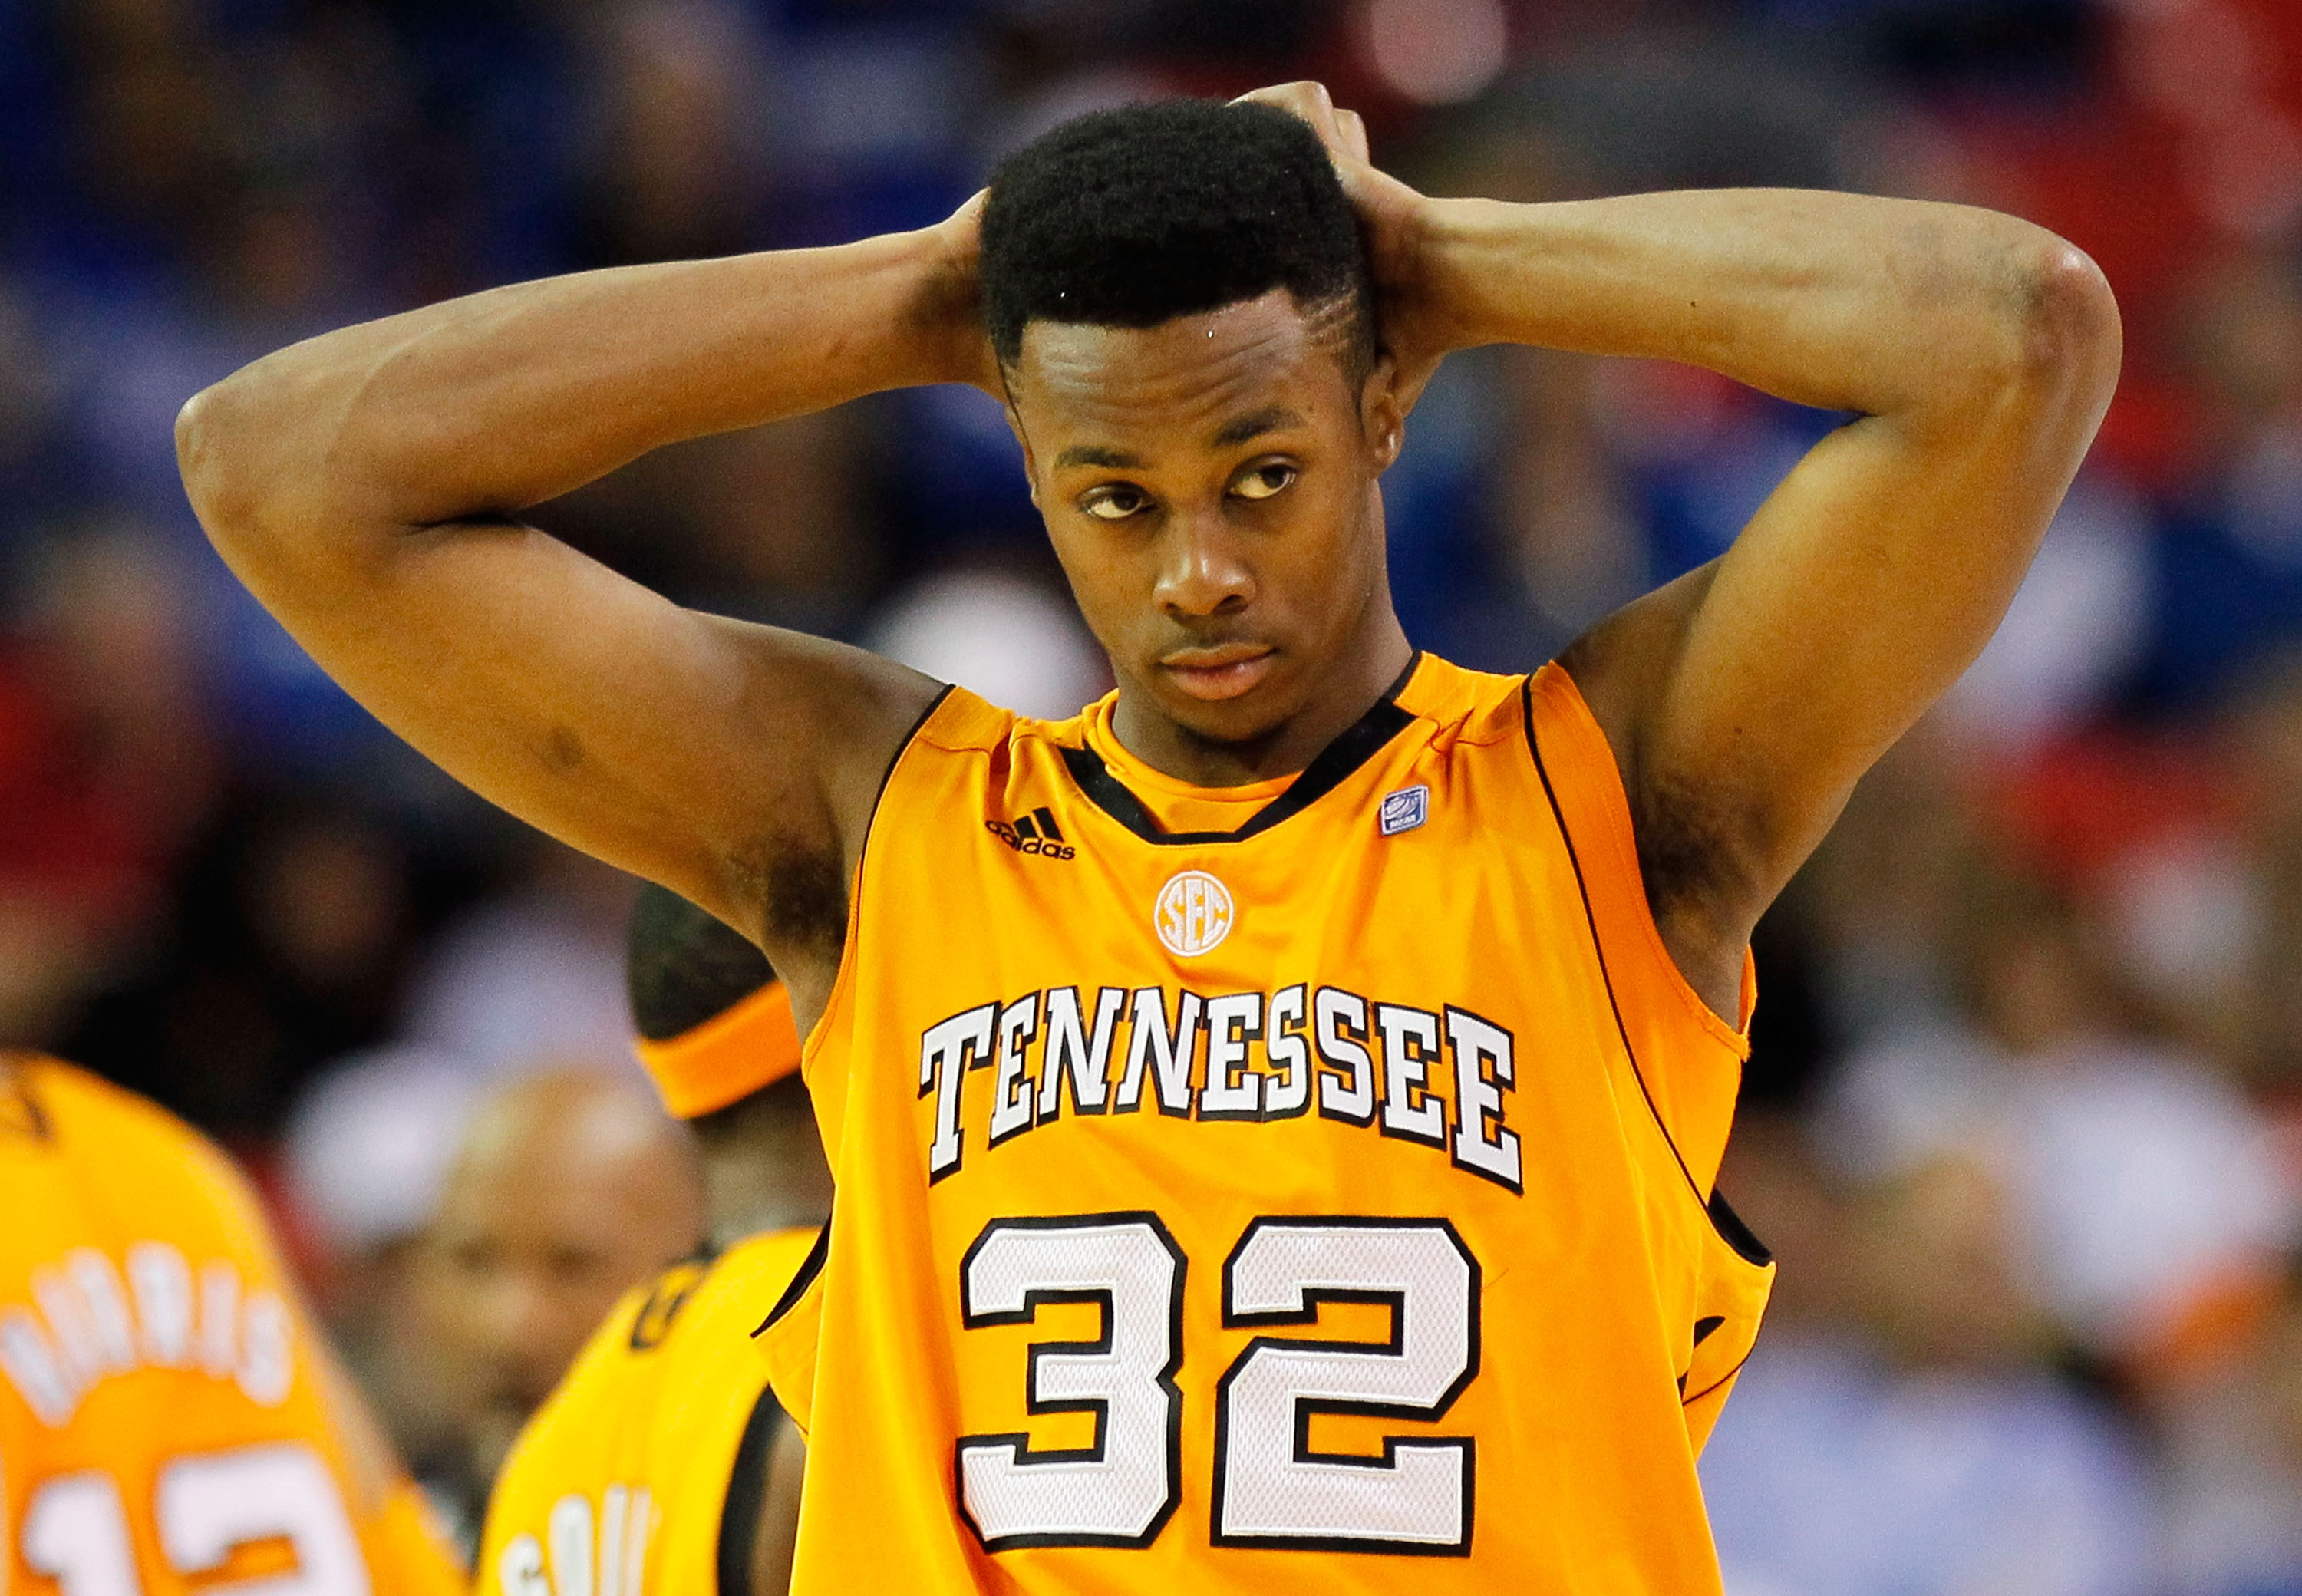 ATLANTA, GA - MARCH 11:  Scotty Hopson #32 of the Tennessee Volunteers reacts during their game against the Florida Gators in the quarterfinals of the SEC Men's Basketball Tournament at Georgia Dome on March 11, 2011 in Atlanta, Georgia.  (Photo by Kevin